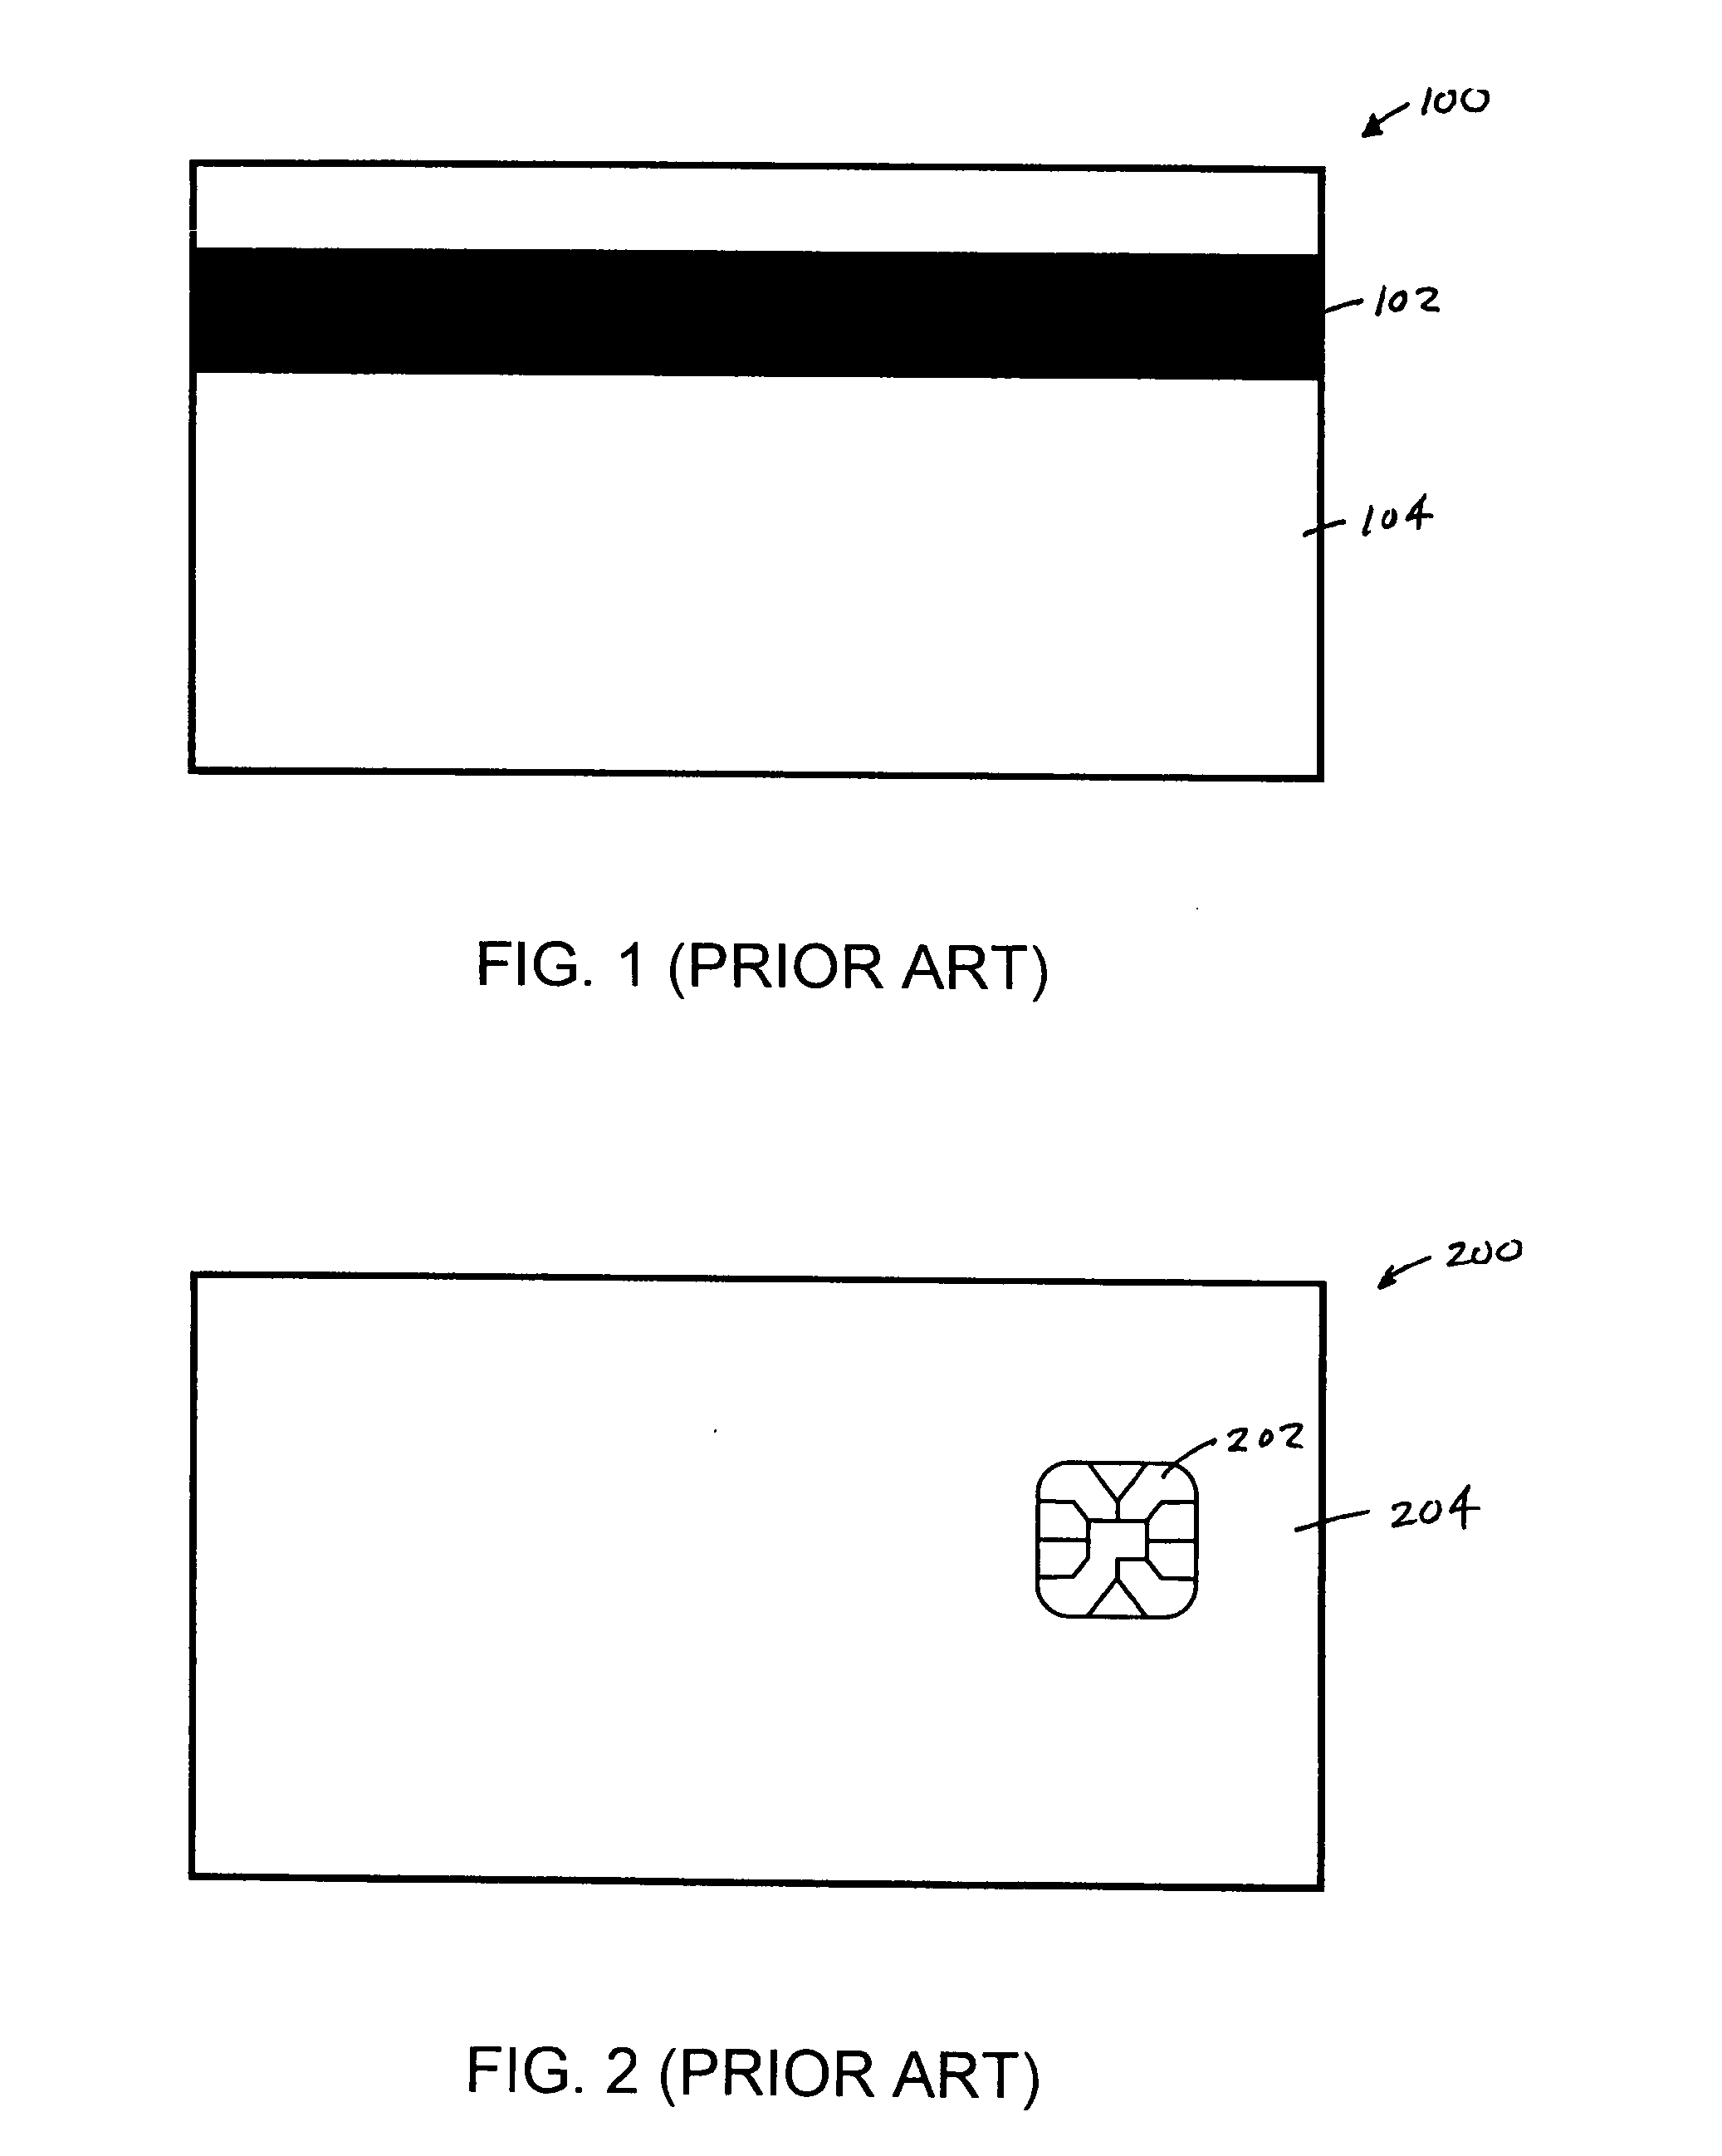 System, Method and Apparatus for Enabling Transactions Using a Biometrically Enabled Programmable Magnetic Stripe